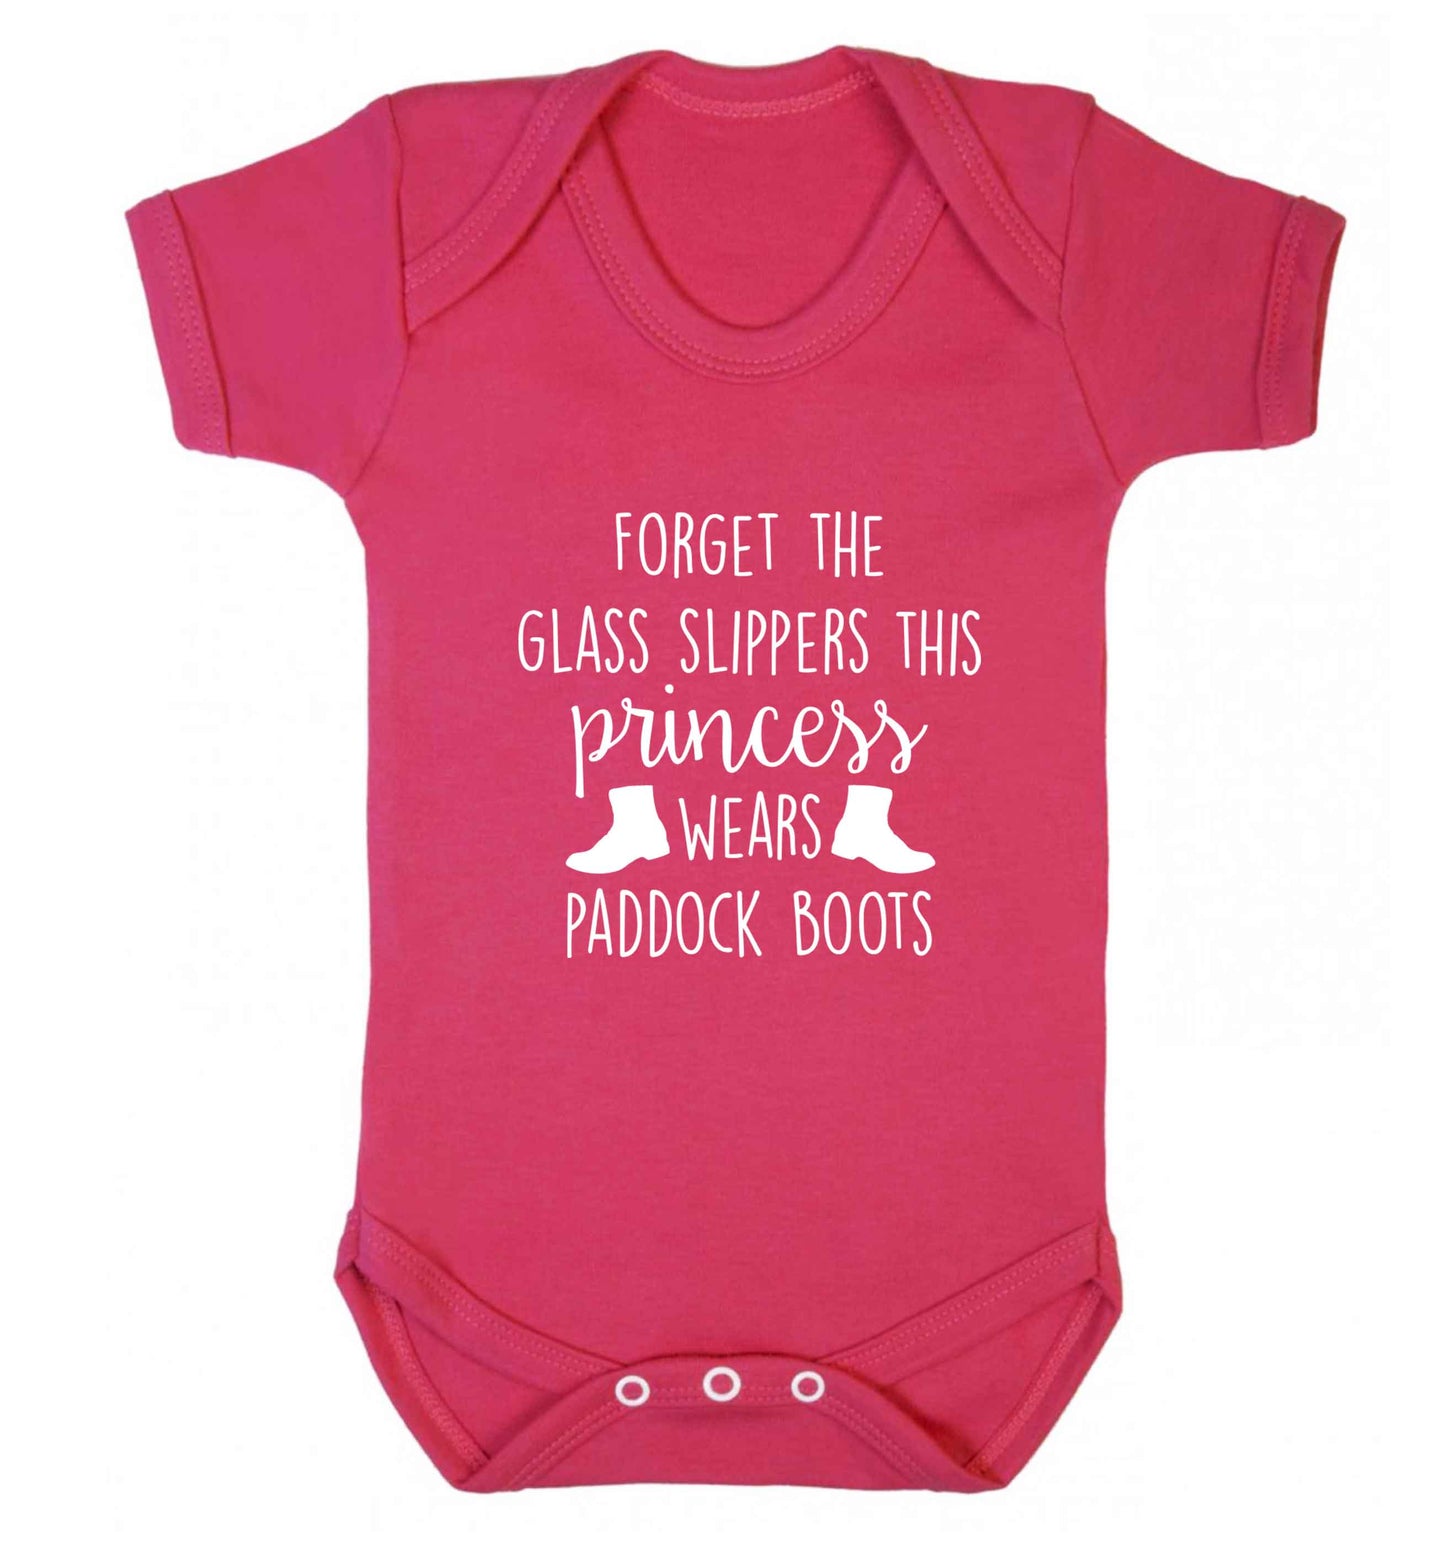 Forget the glass slippers this princess wears paddock boots baby vest dark pink 18-24 months